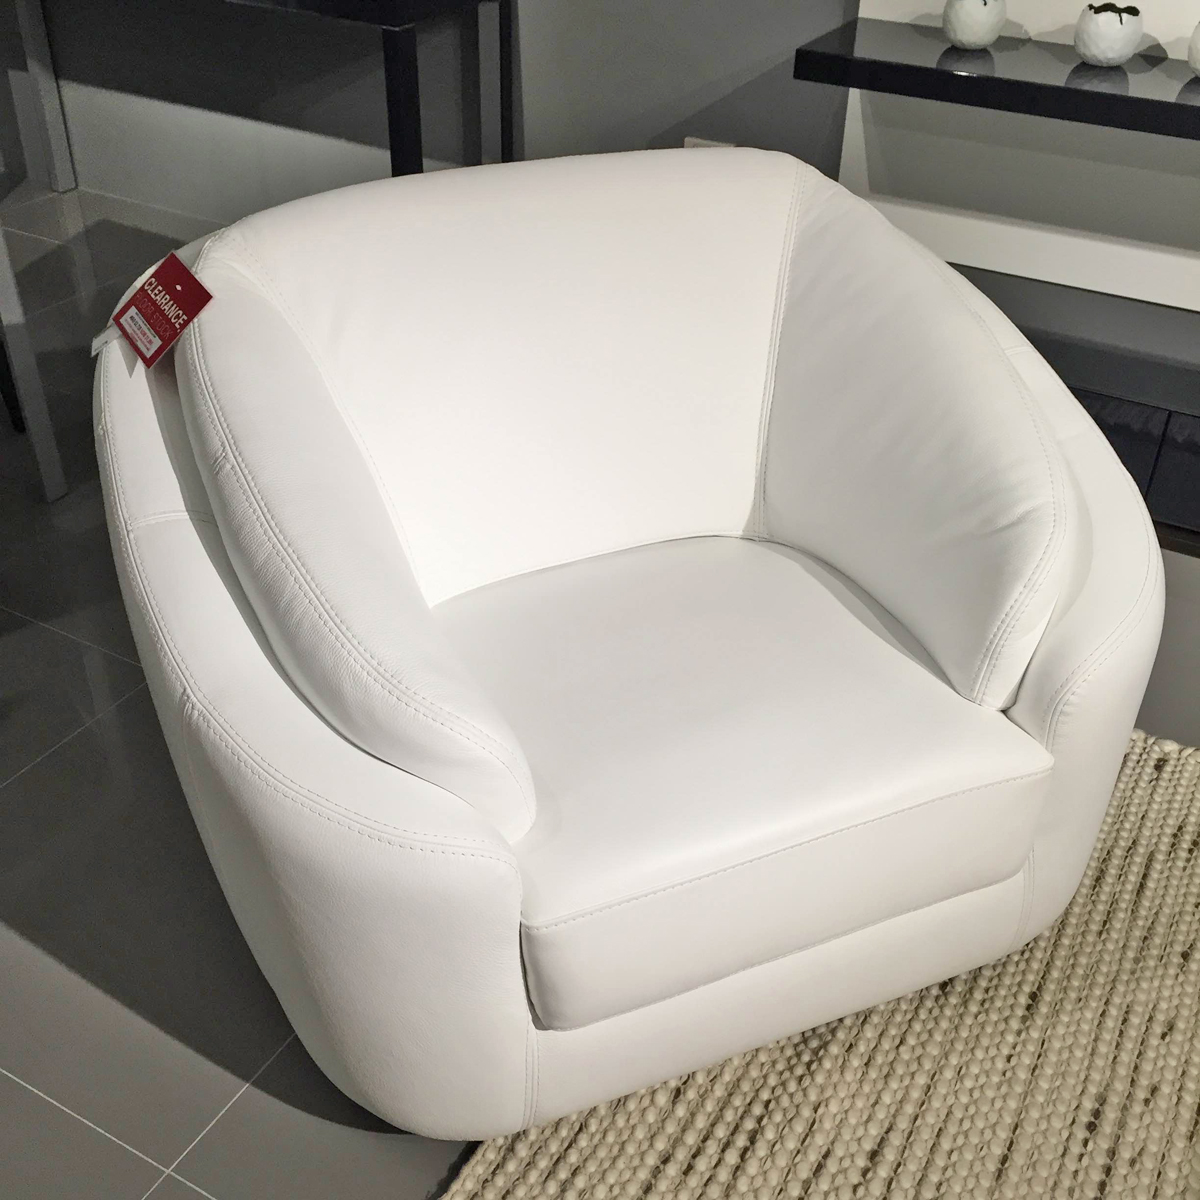 Crows Nest - Rusco Swivel Armchair White Leather - Beyond Furniture